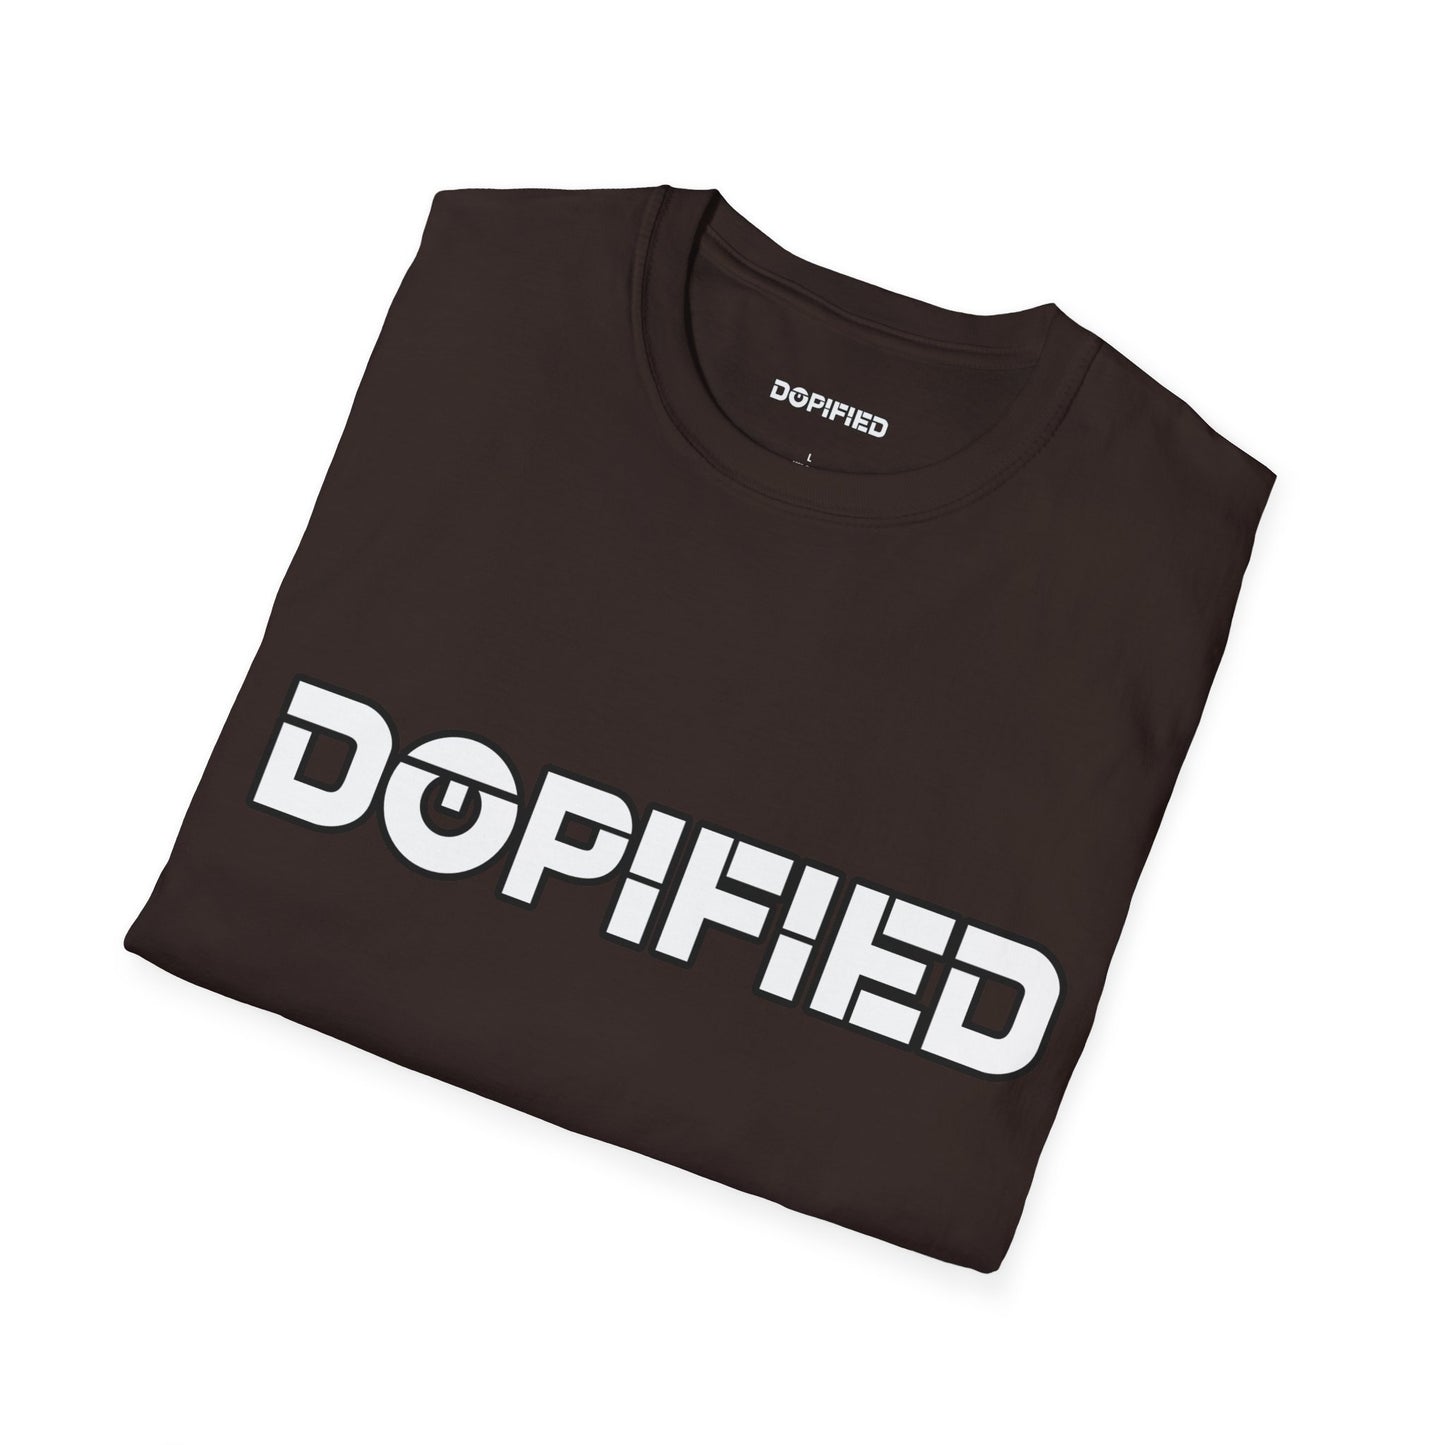 Emo Unisex Softstyle T-Shirt DOPiFiED edition